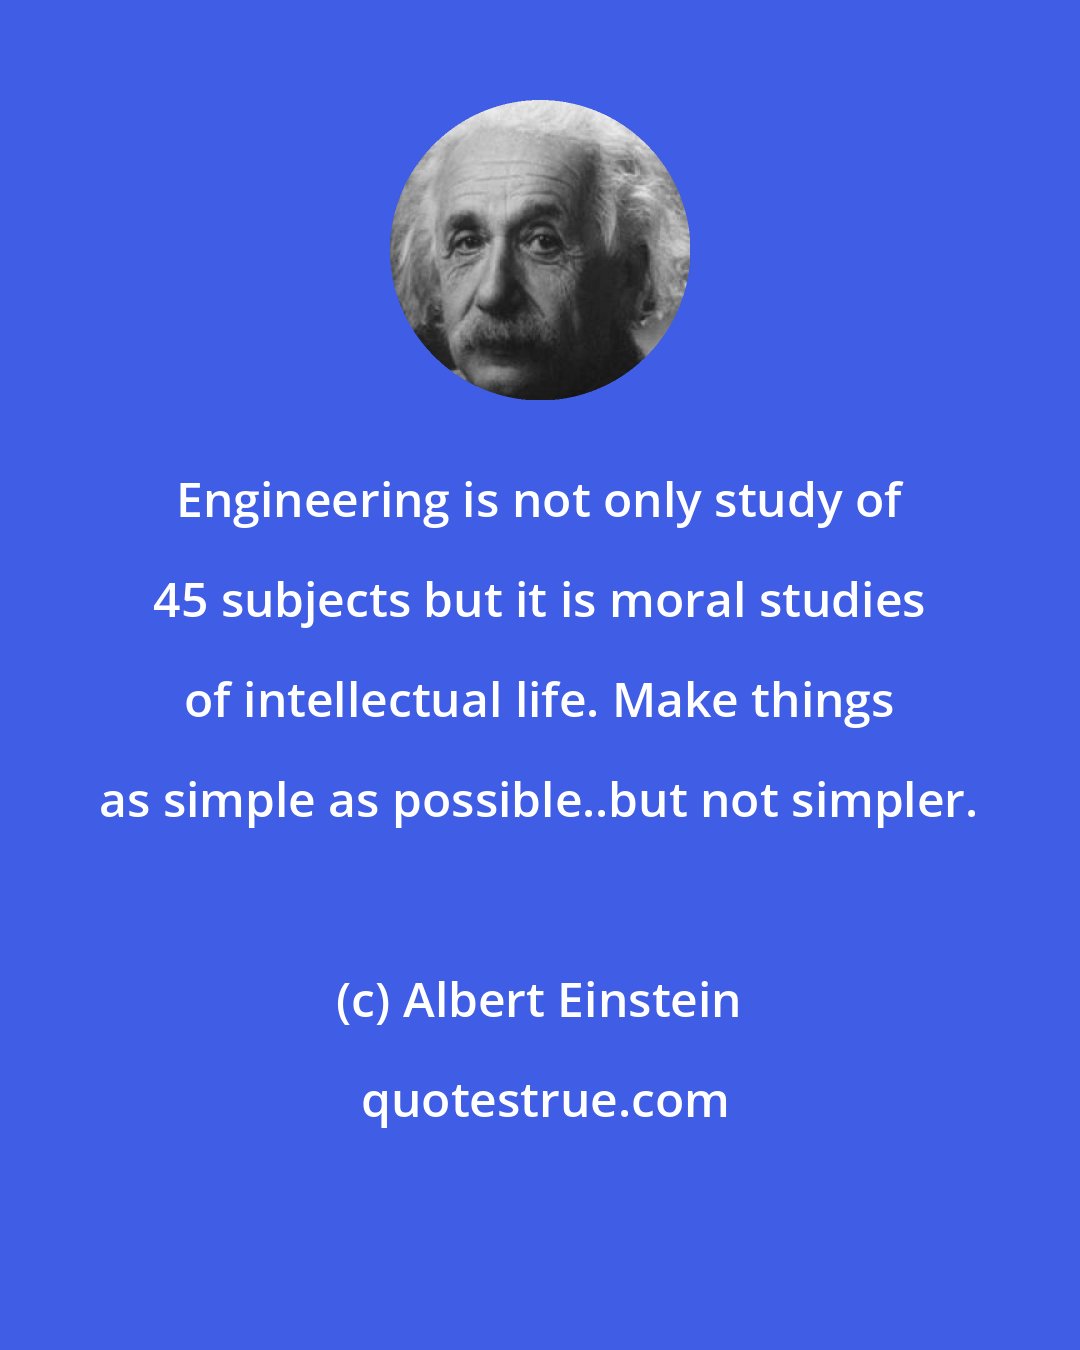 Albert Einstein: Engineering is not only study of 45 subjects but it is moral studies of intellectual life. Make things as simple as possible..but not simpler.